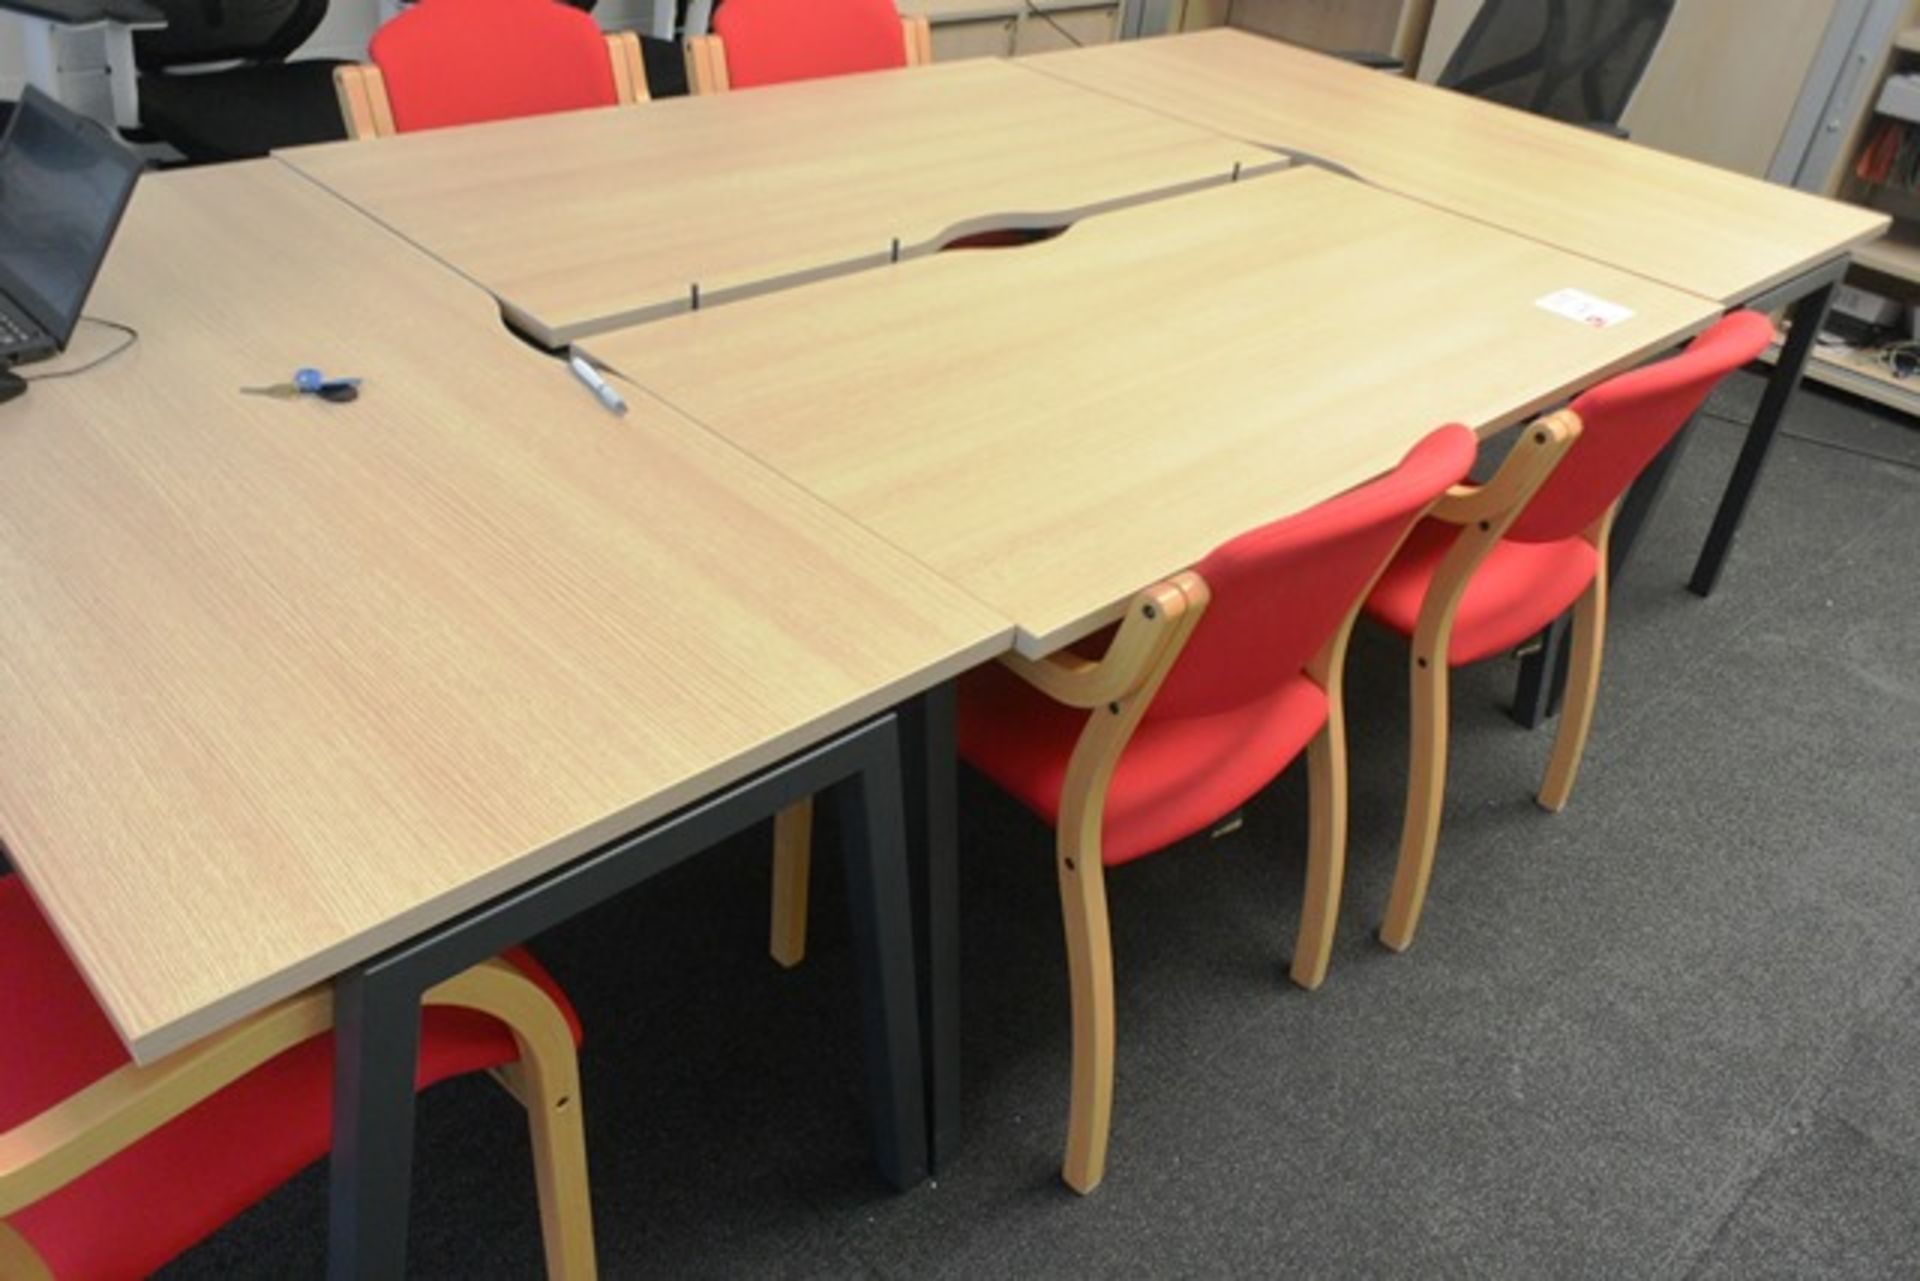 Light oak effect rectangular 4 section boardroom table and six red cloth upholsterd chairs